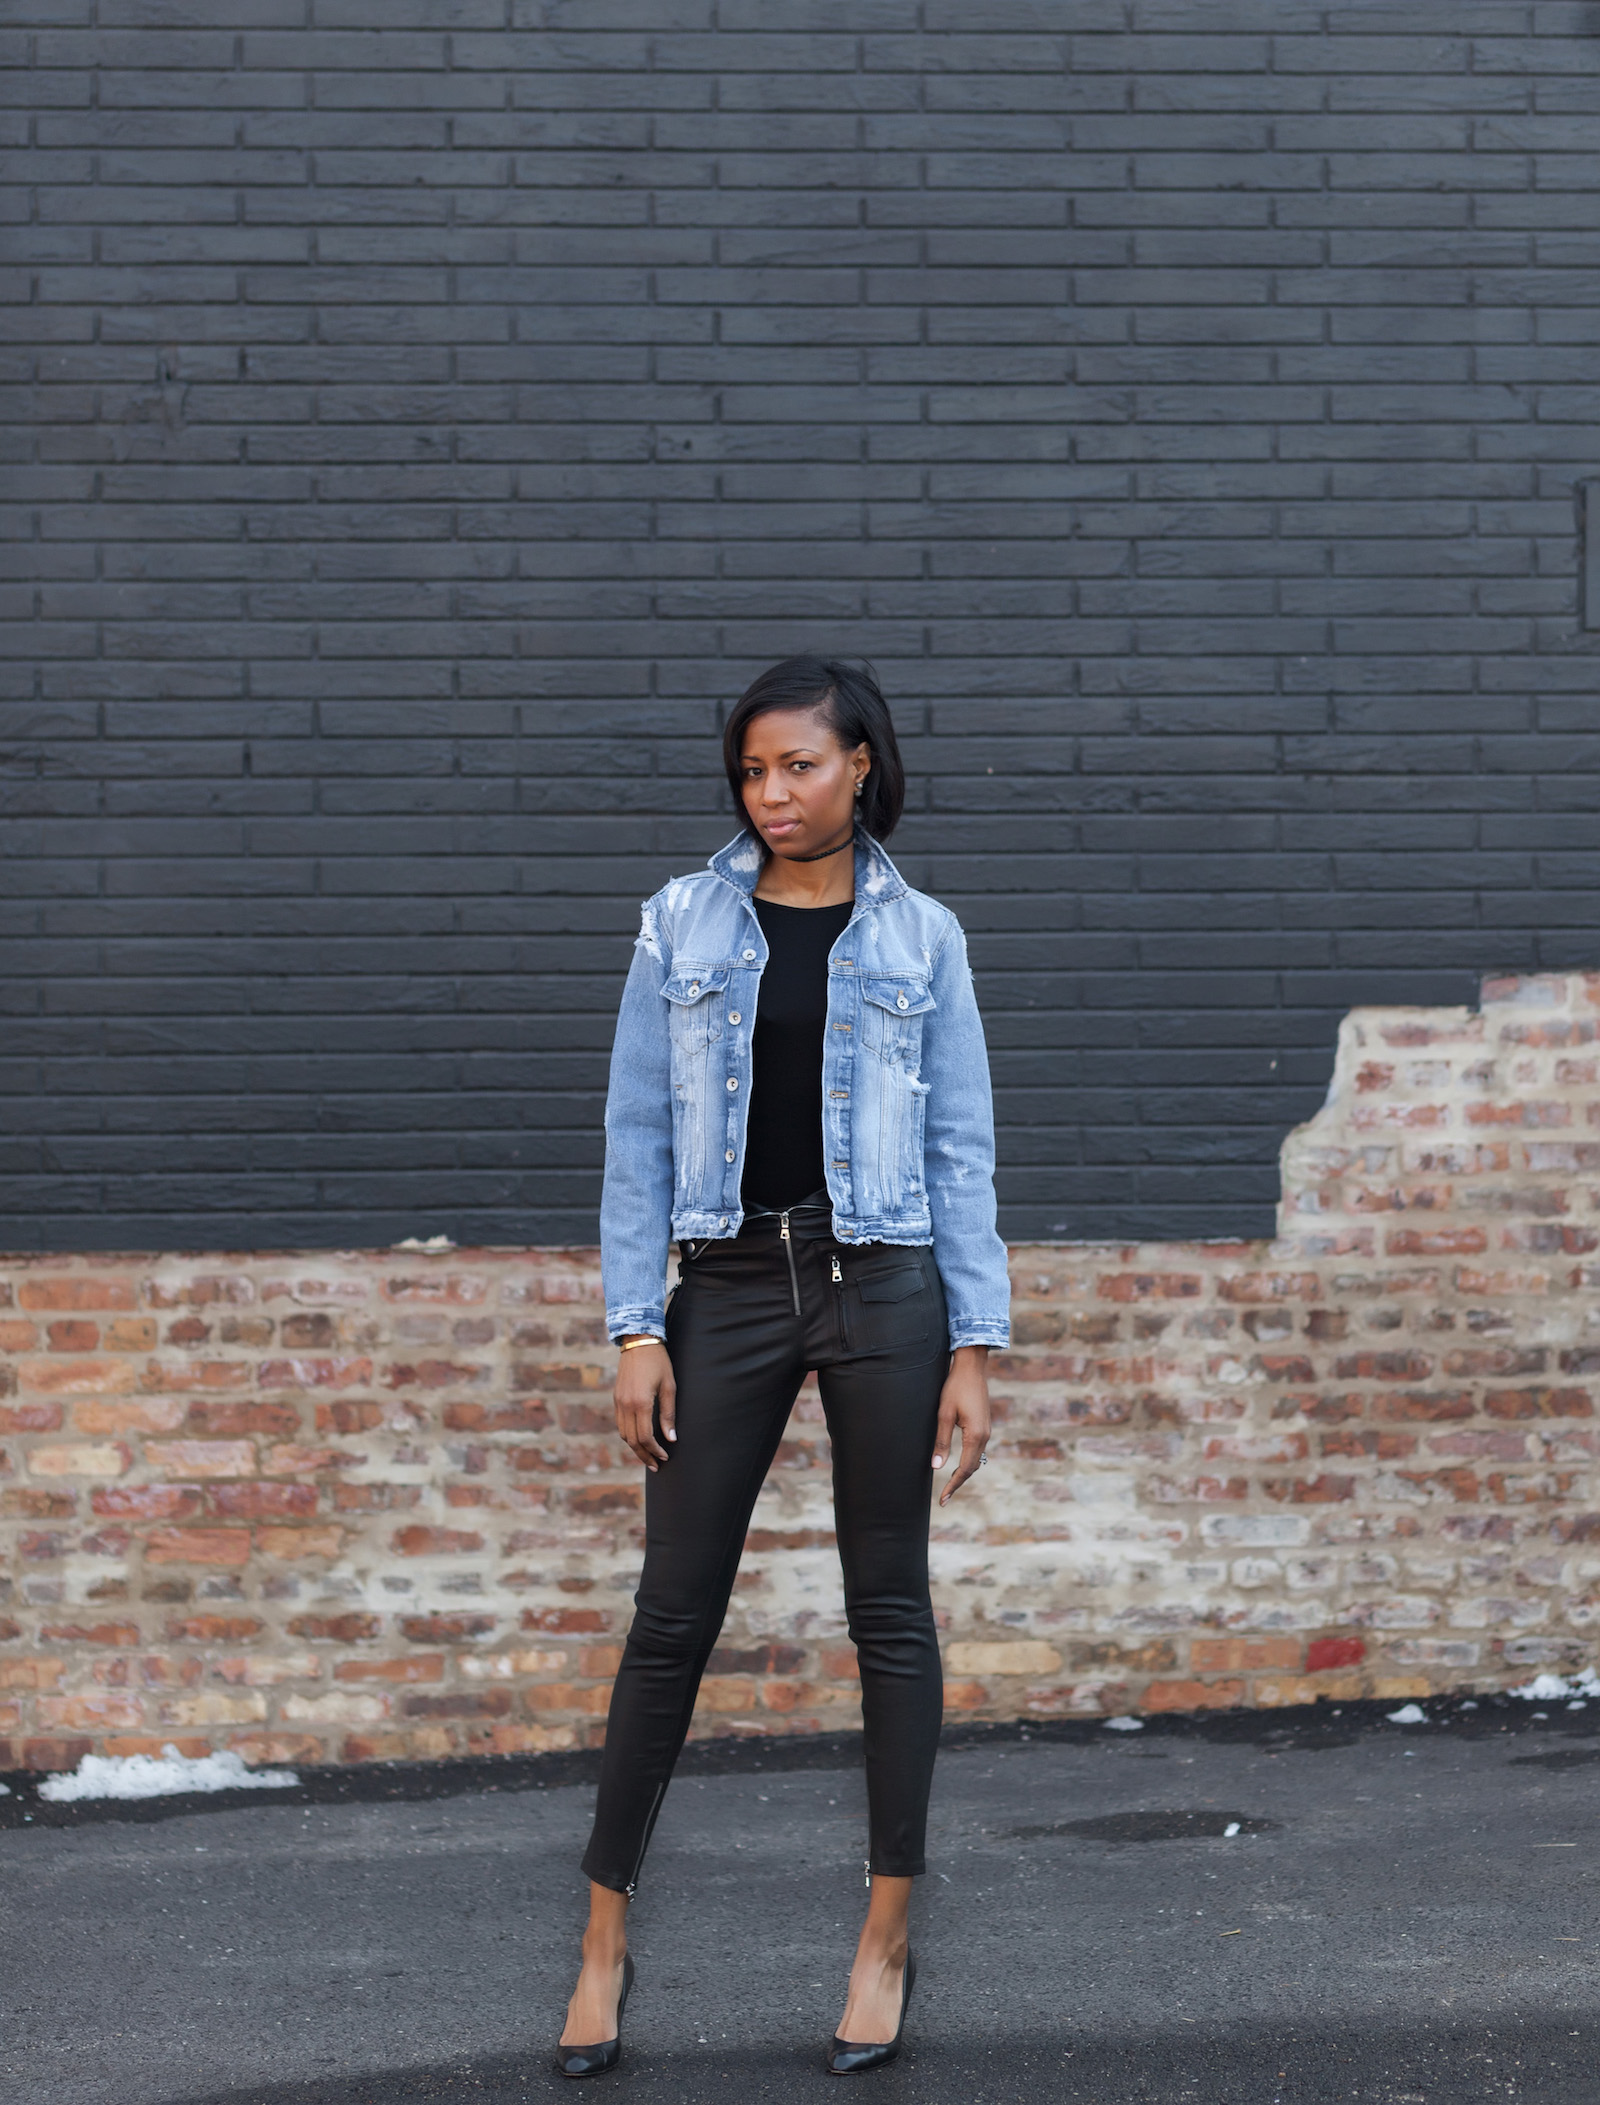 denim and leather outfit